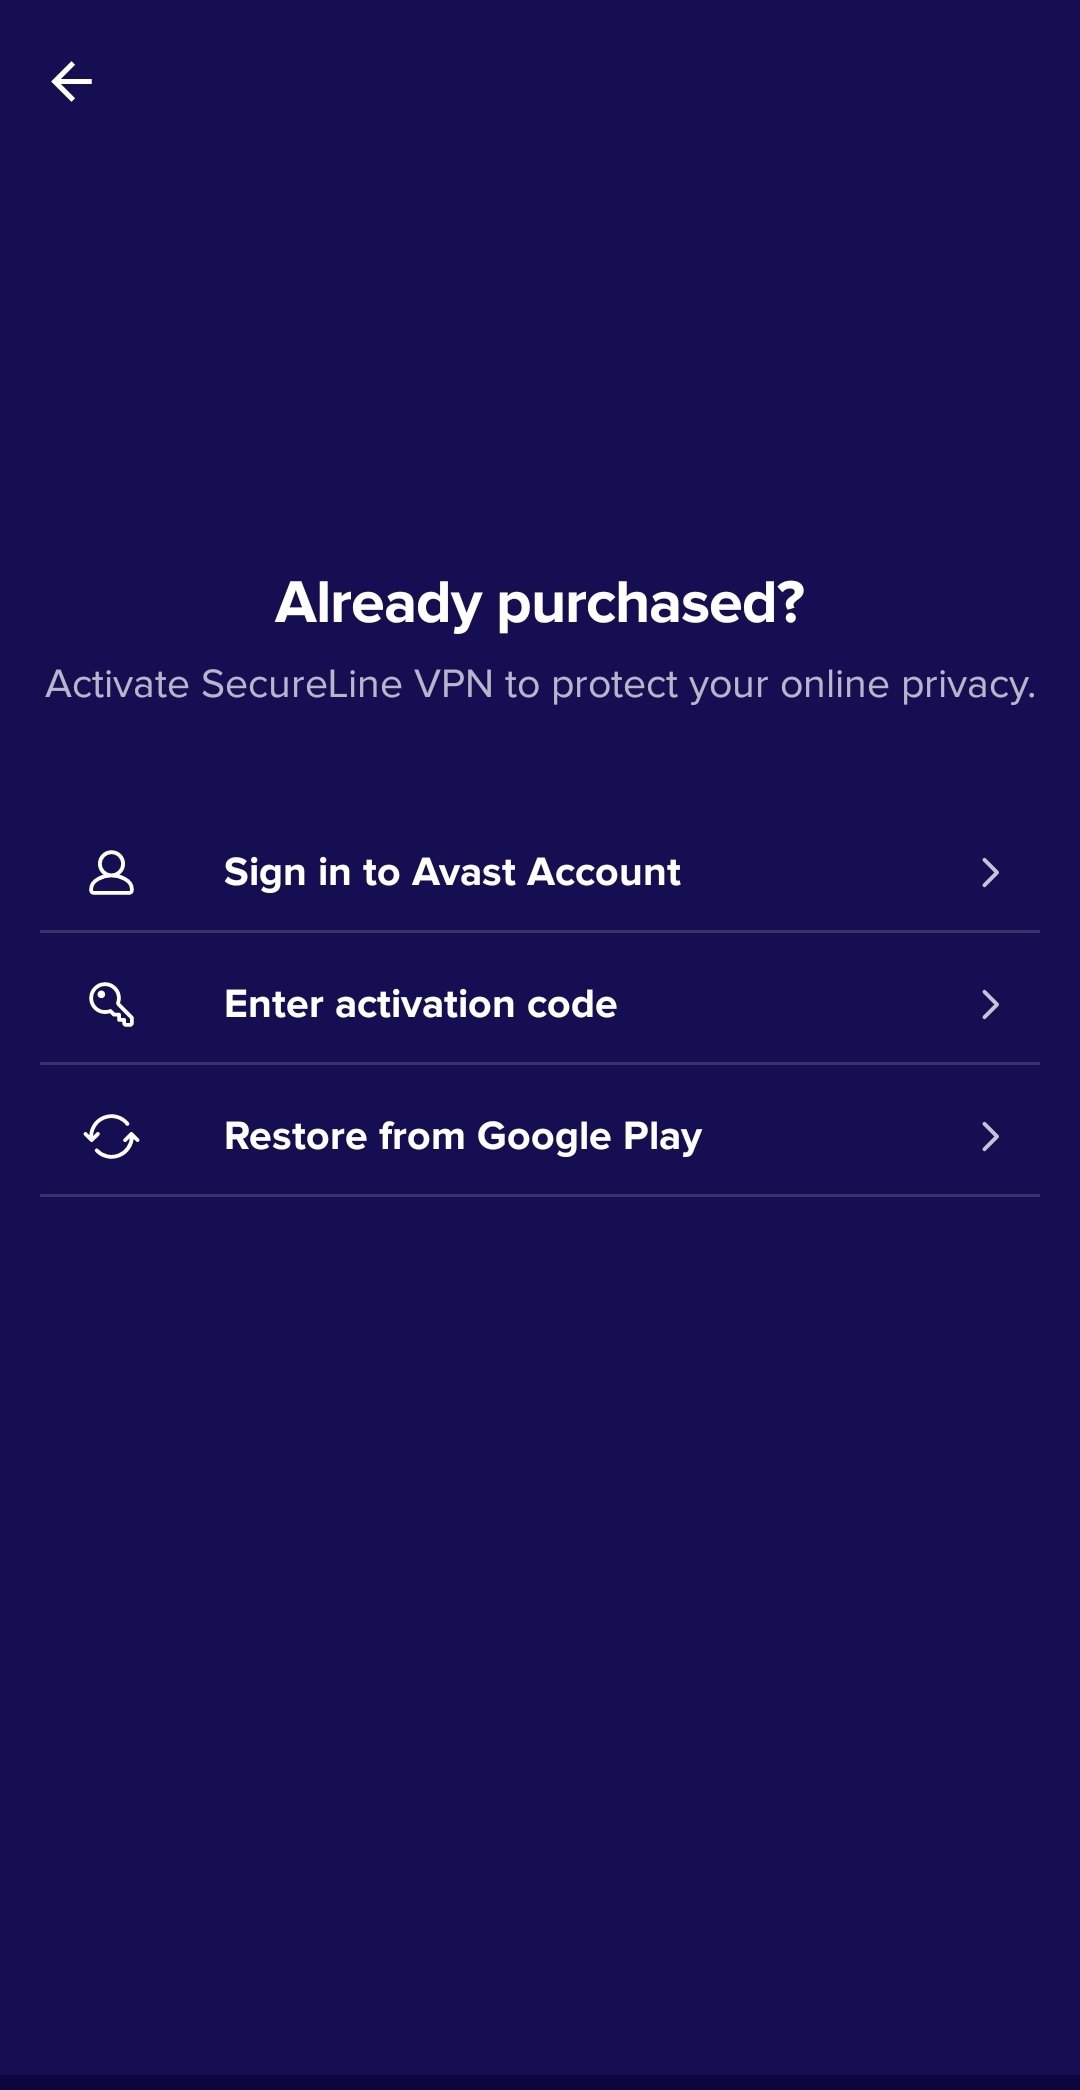 avast vpn for android